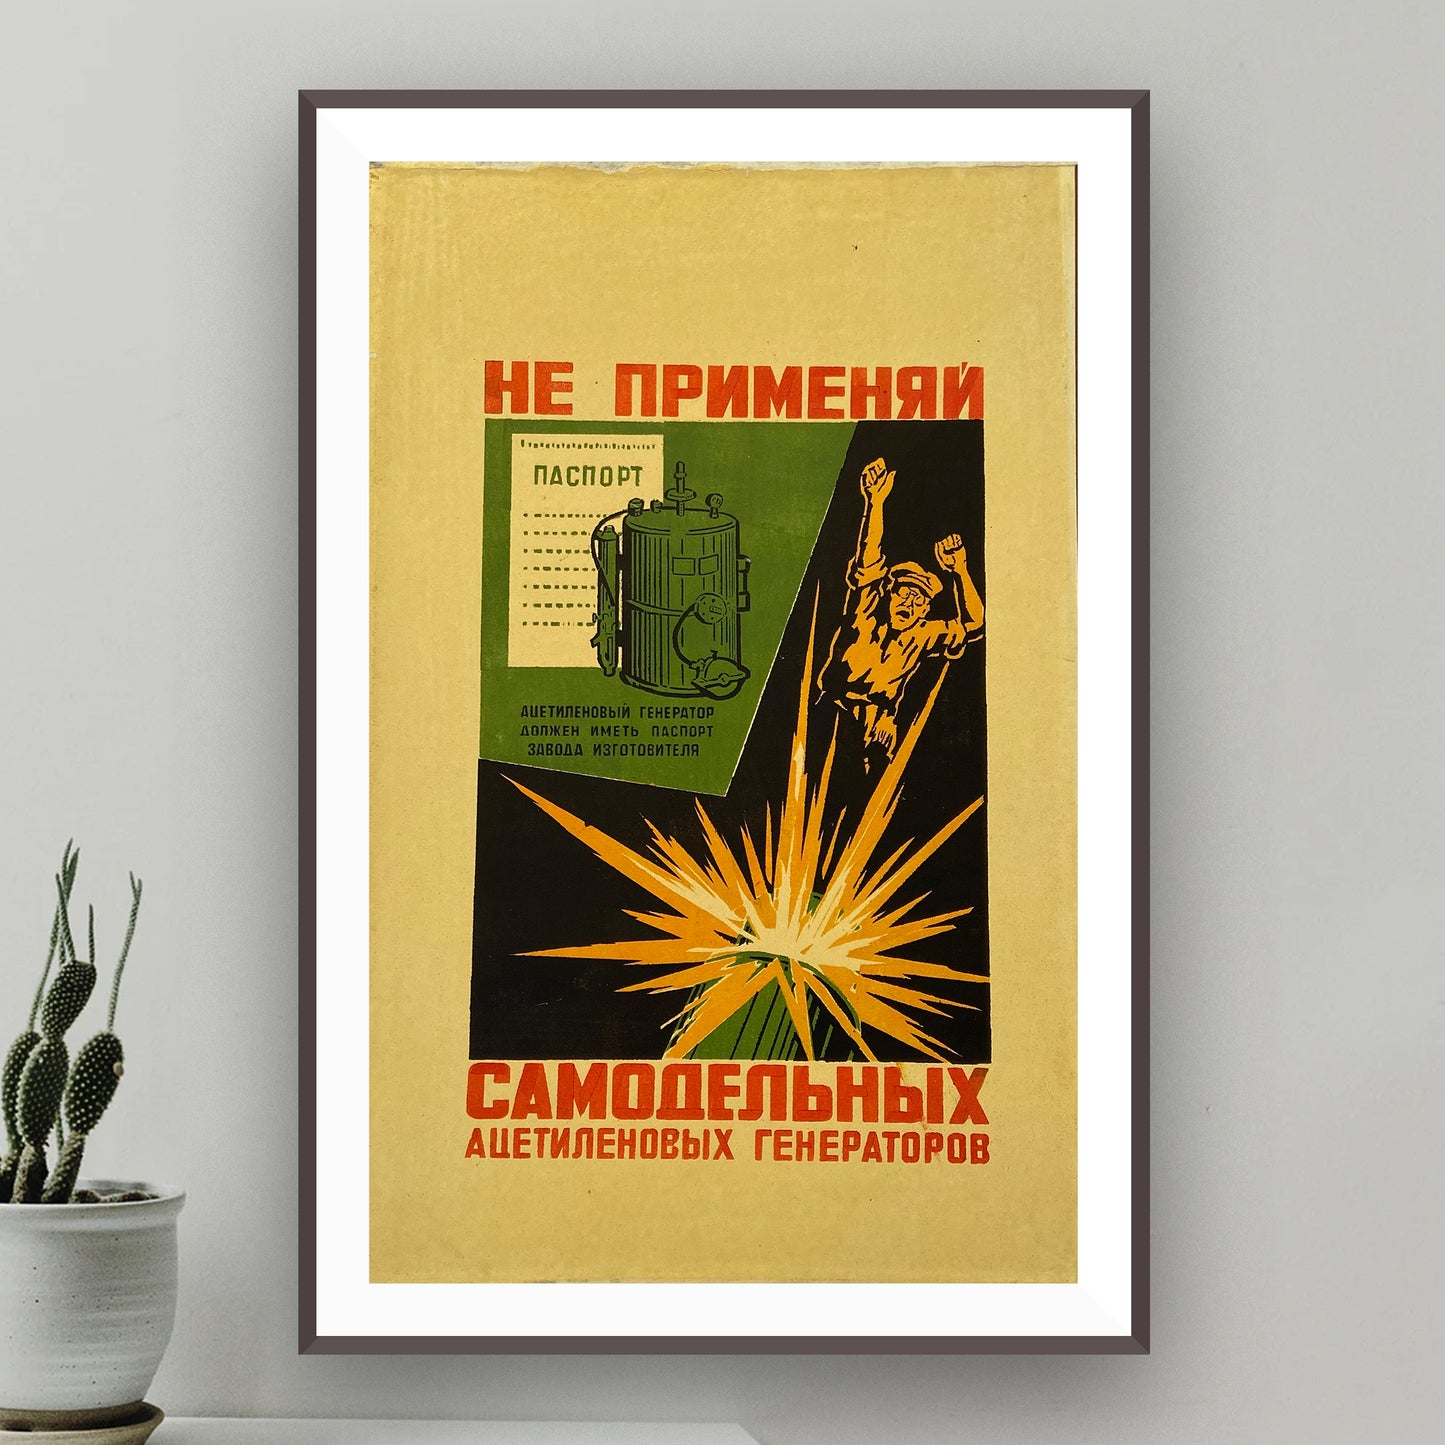 Poster, "Do not use self made acetylene generators", Worker safety VEF Riga, Latvian SSR, 1960s